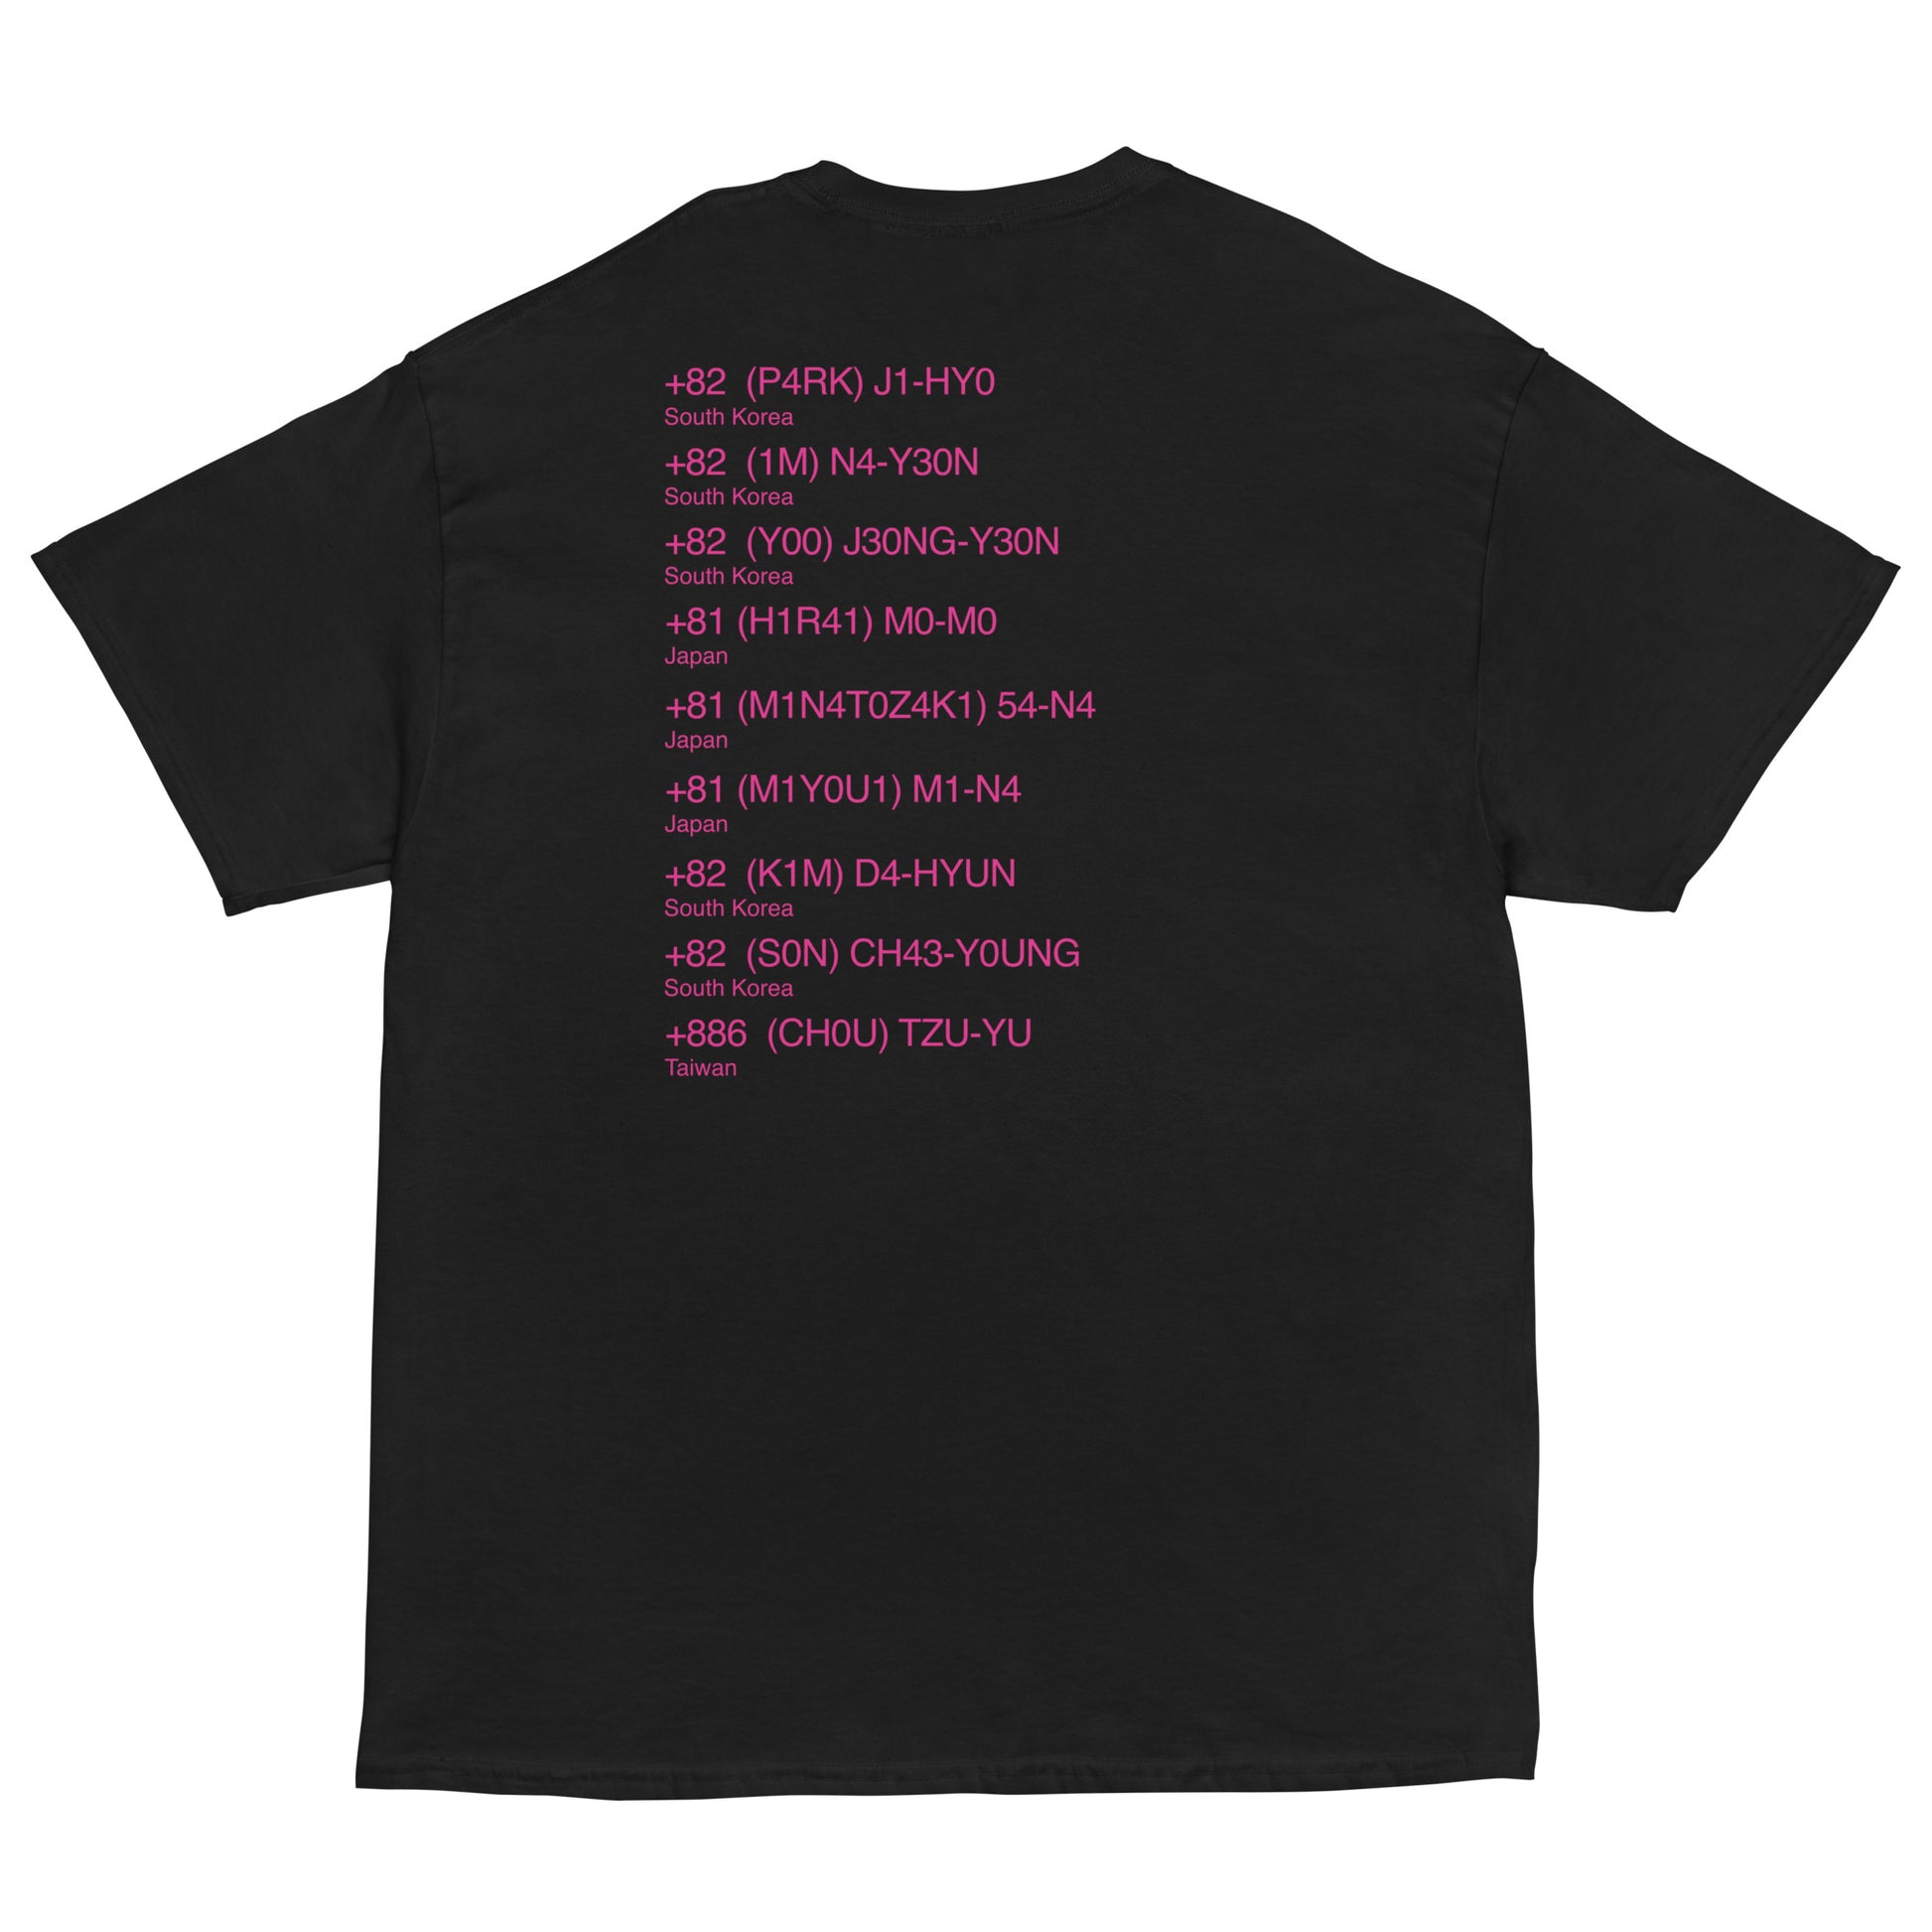 Twice Mobile 5G LTE T-Shirt